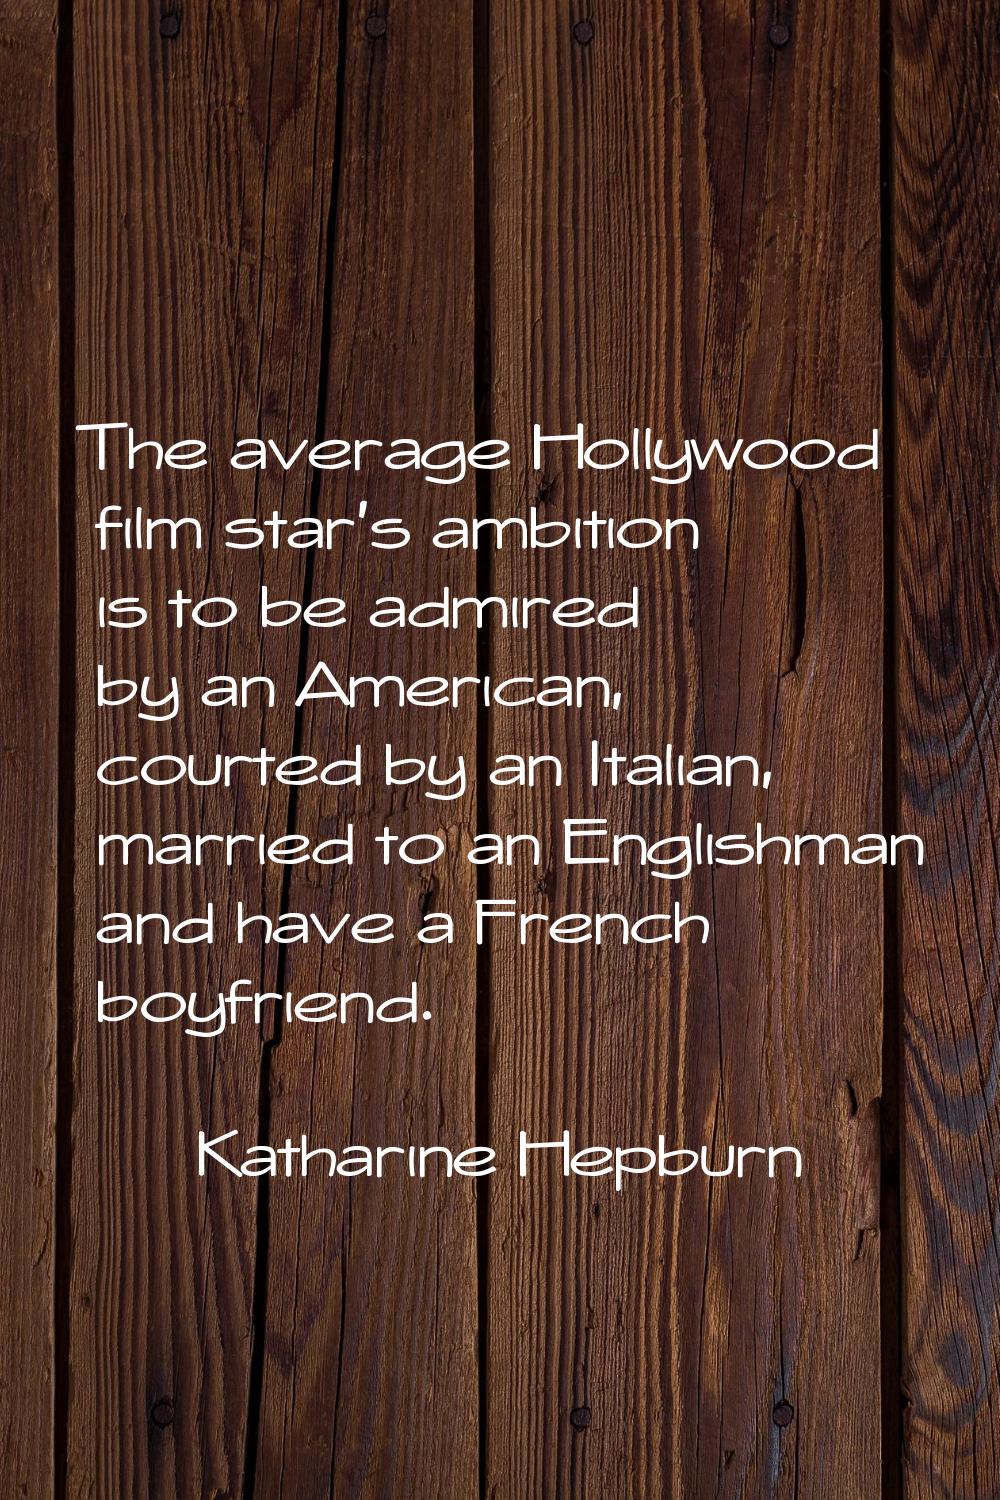 The average Hollywood film star's ambition is to be admired by an American, courted by an Italian, 